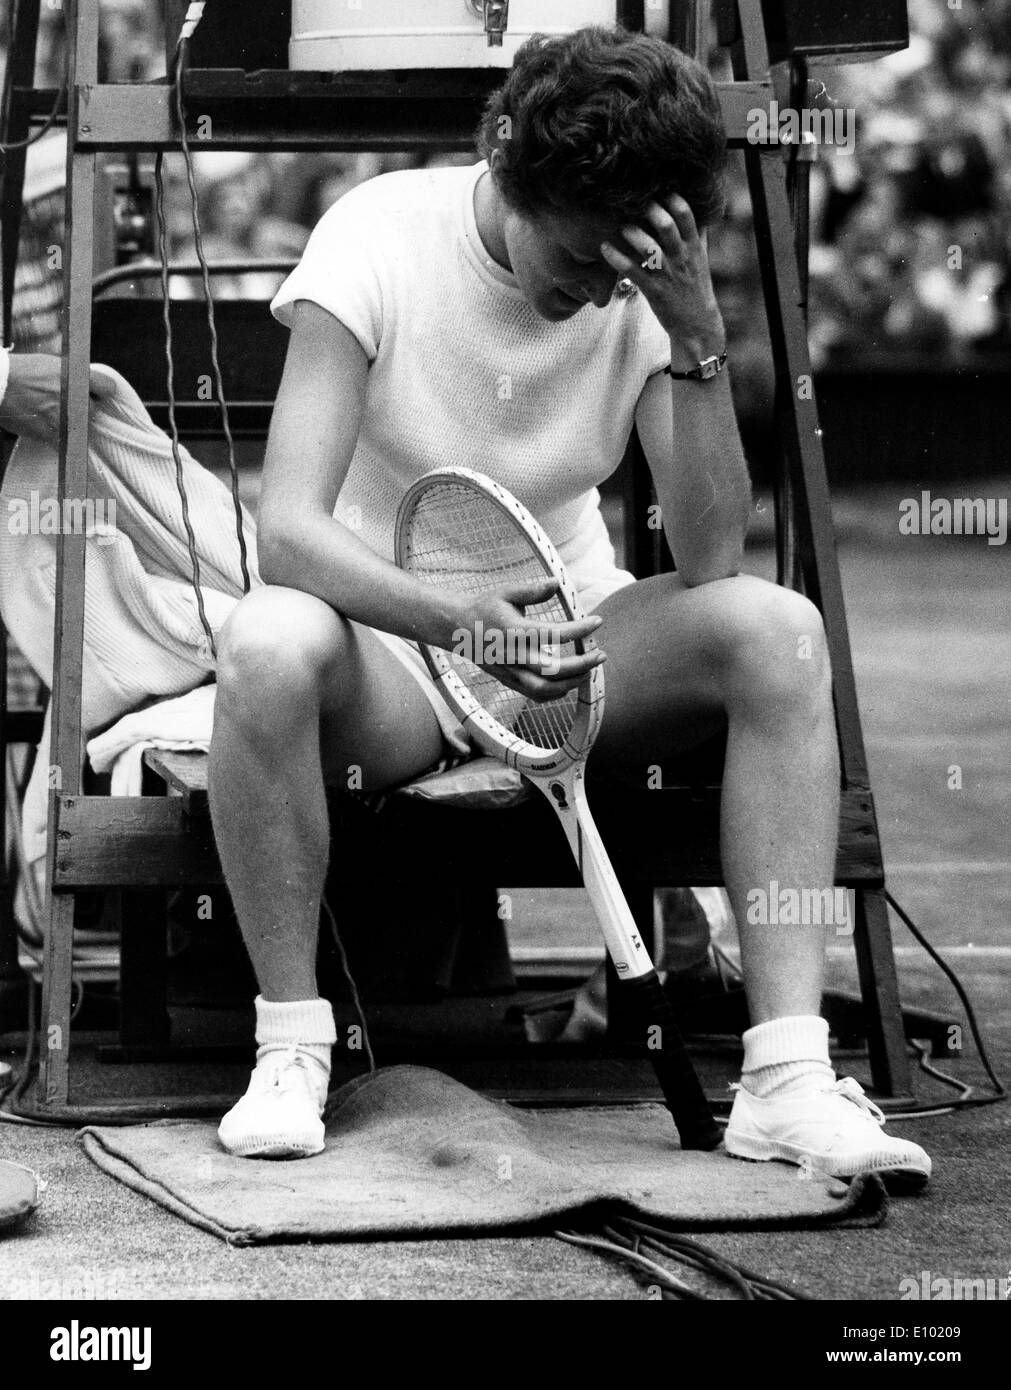 ANGELA BUXTON is an English tennis player. won the women's doubles title at both the French Championships and Wimbledon Stock Photo